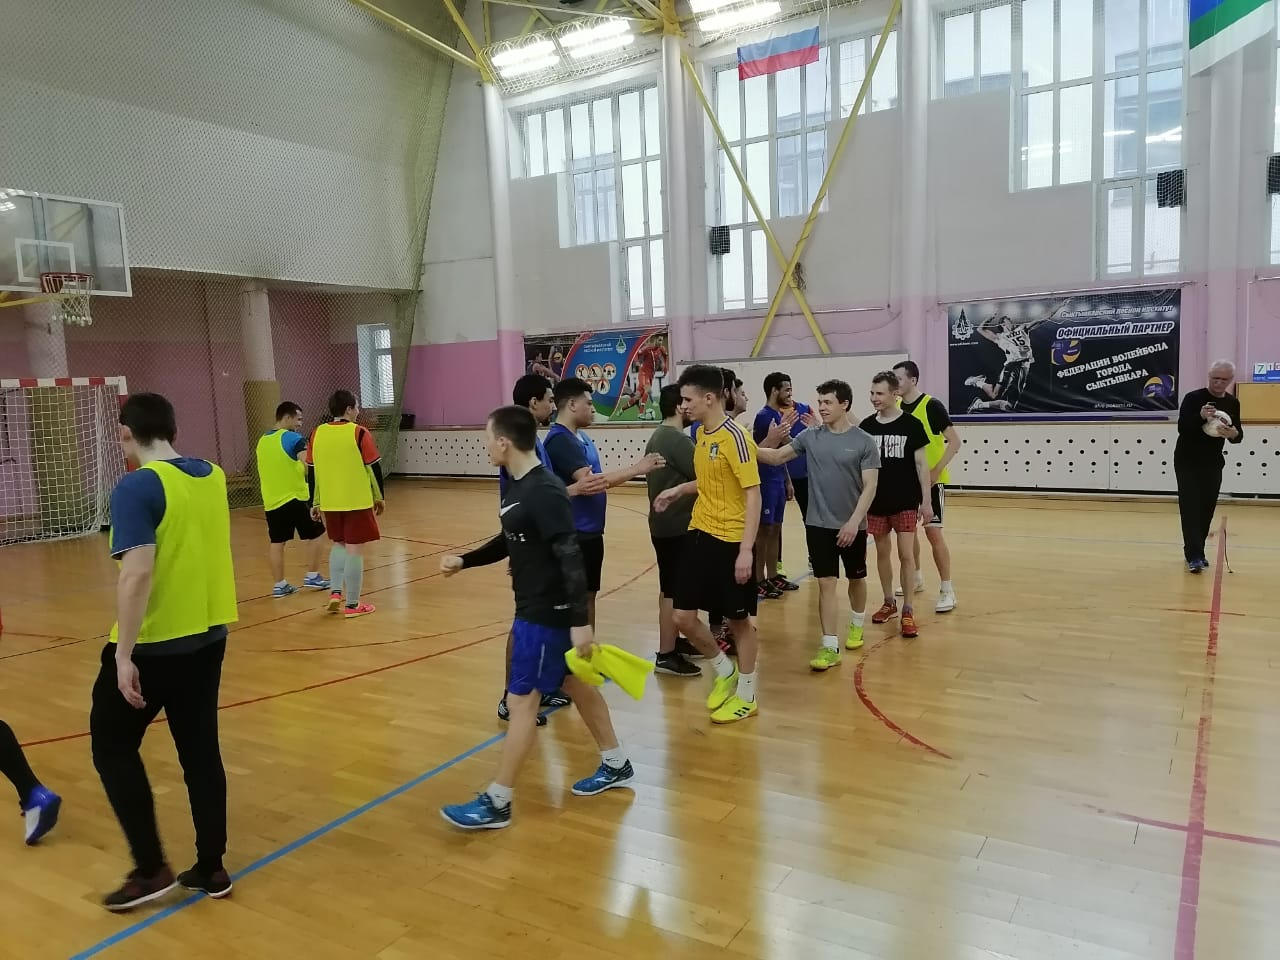 Pitirim Sorokin Syktyvkar State University foreign students played football with the team of Syktyvkar Forest Institute